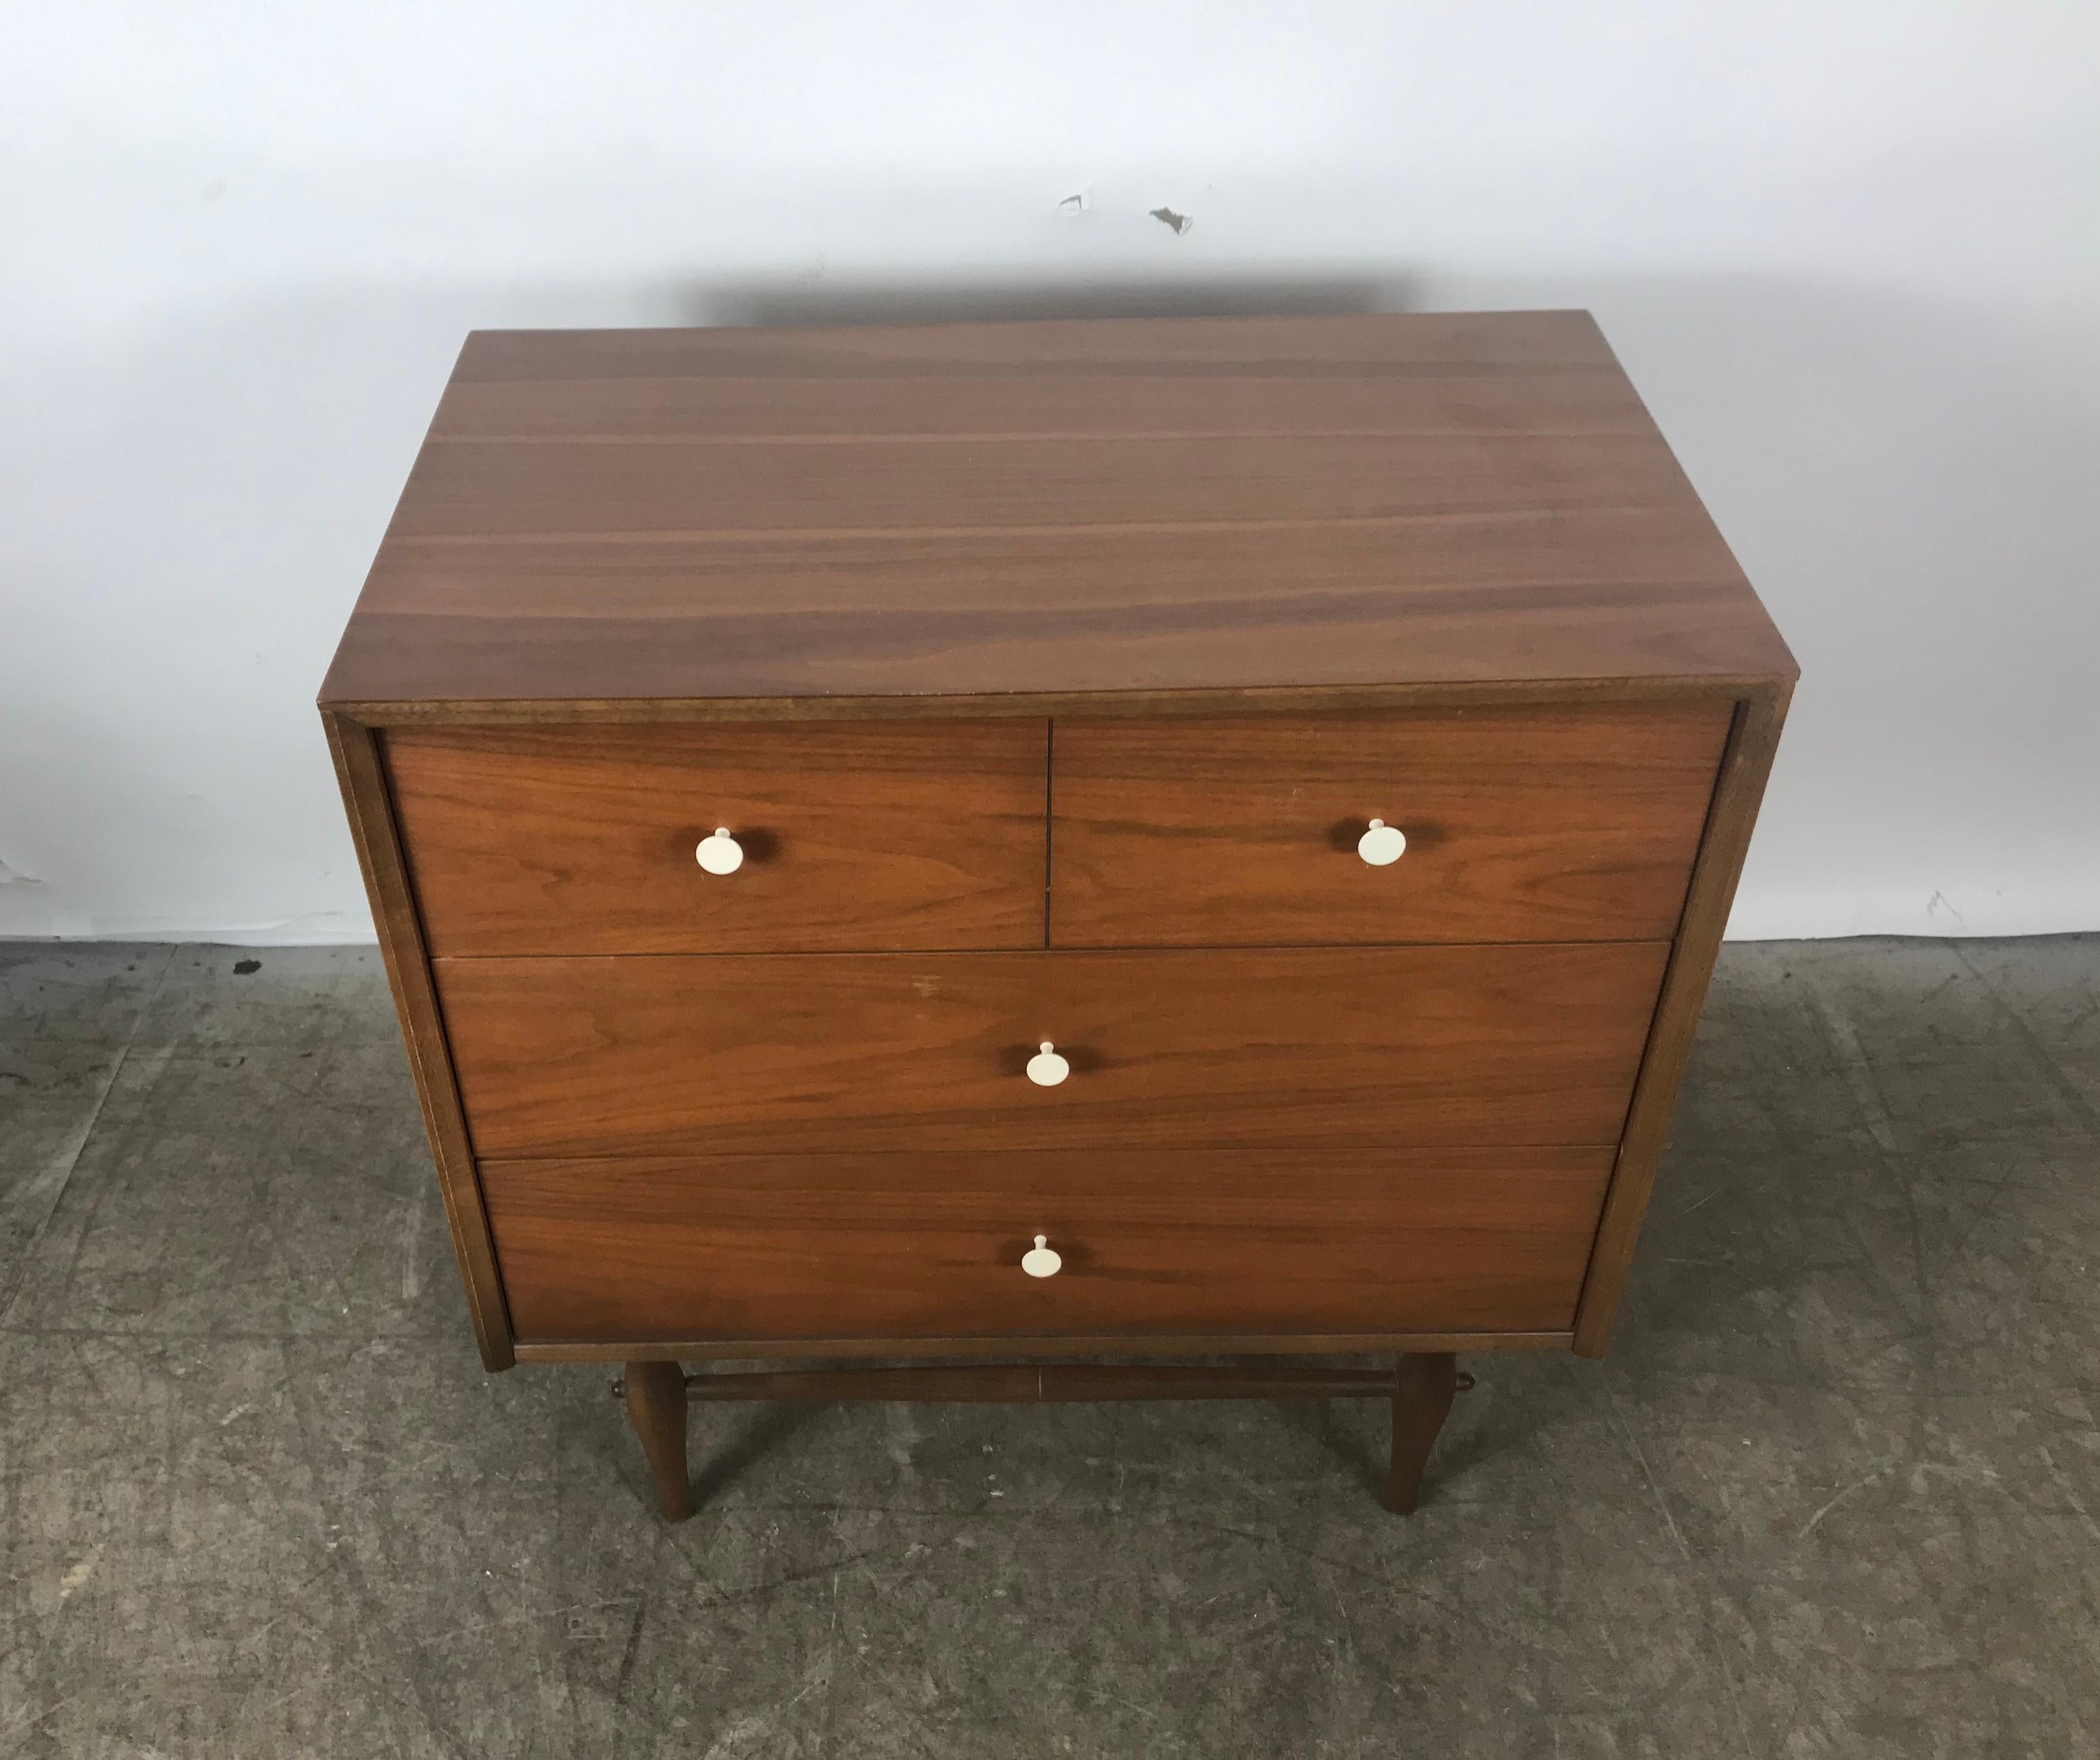 American Modernist 3-drawer chest .. Very reminiscent of the Classic designs by George Nelson, Paul McCobb etc.. Handsome off white porcelain drawer pulls adorn this quality warm walnut wood, nice original finish and patina. Unusual sculptural